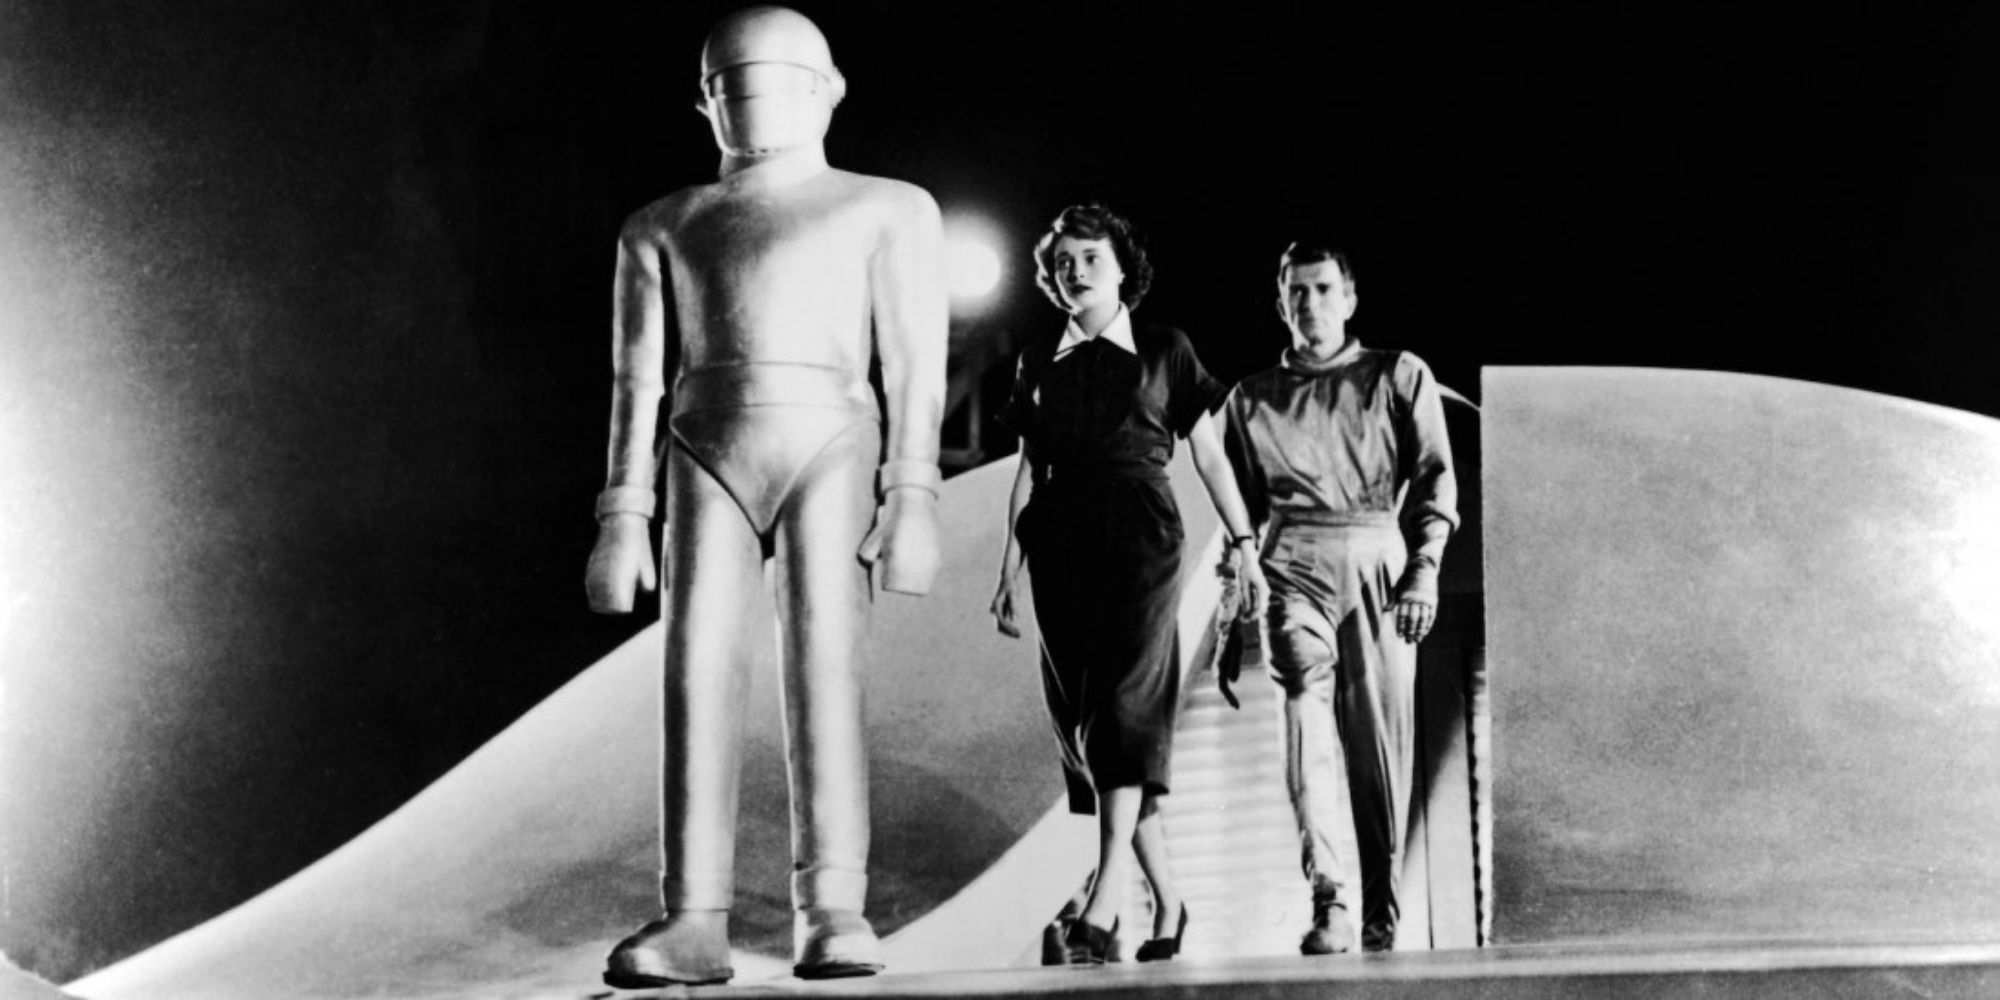 A robot and two people emerging from a spaceship